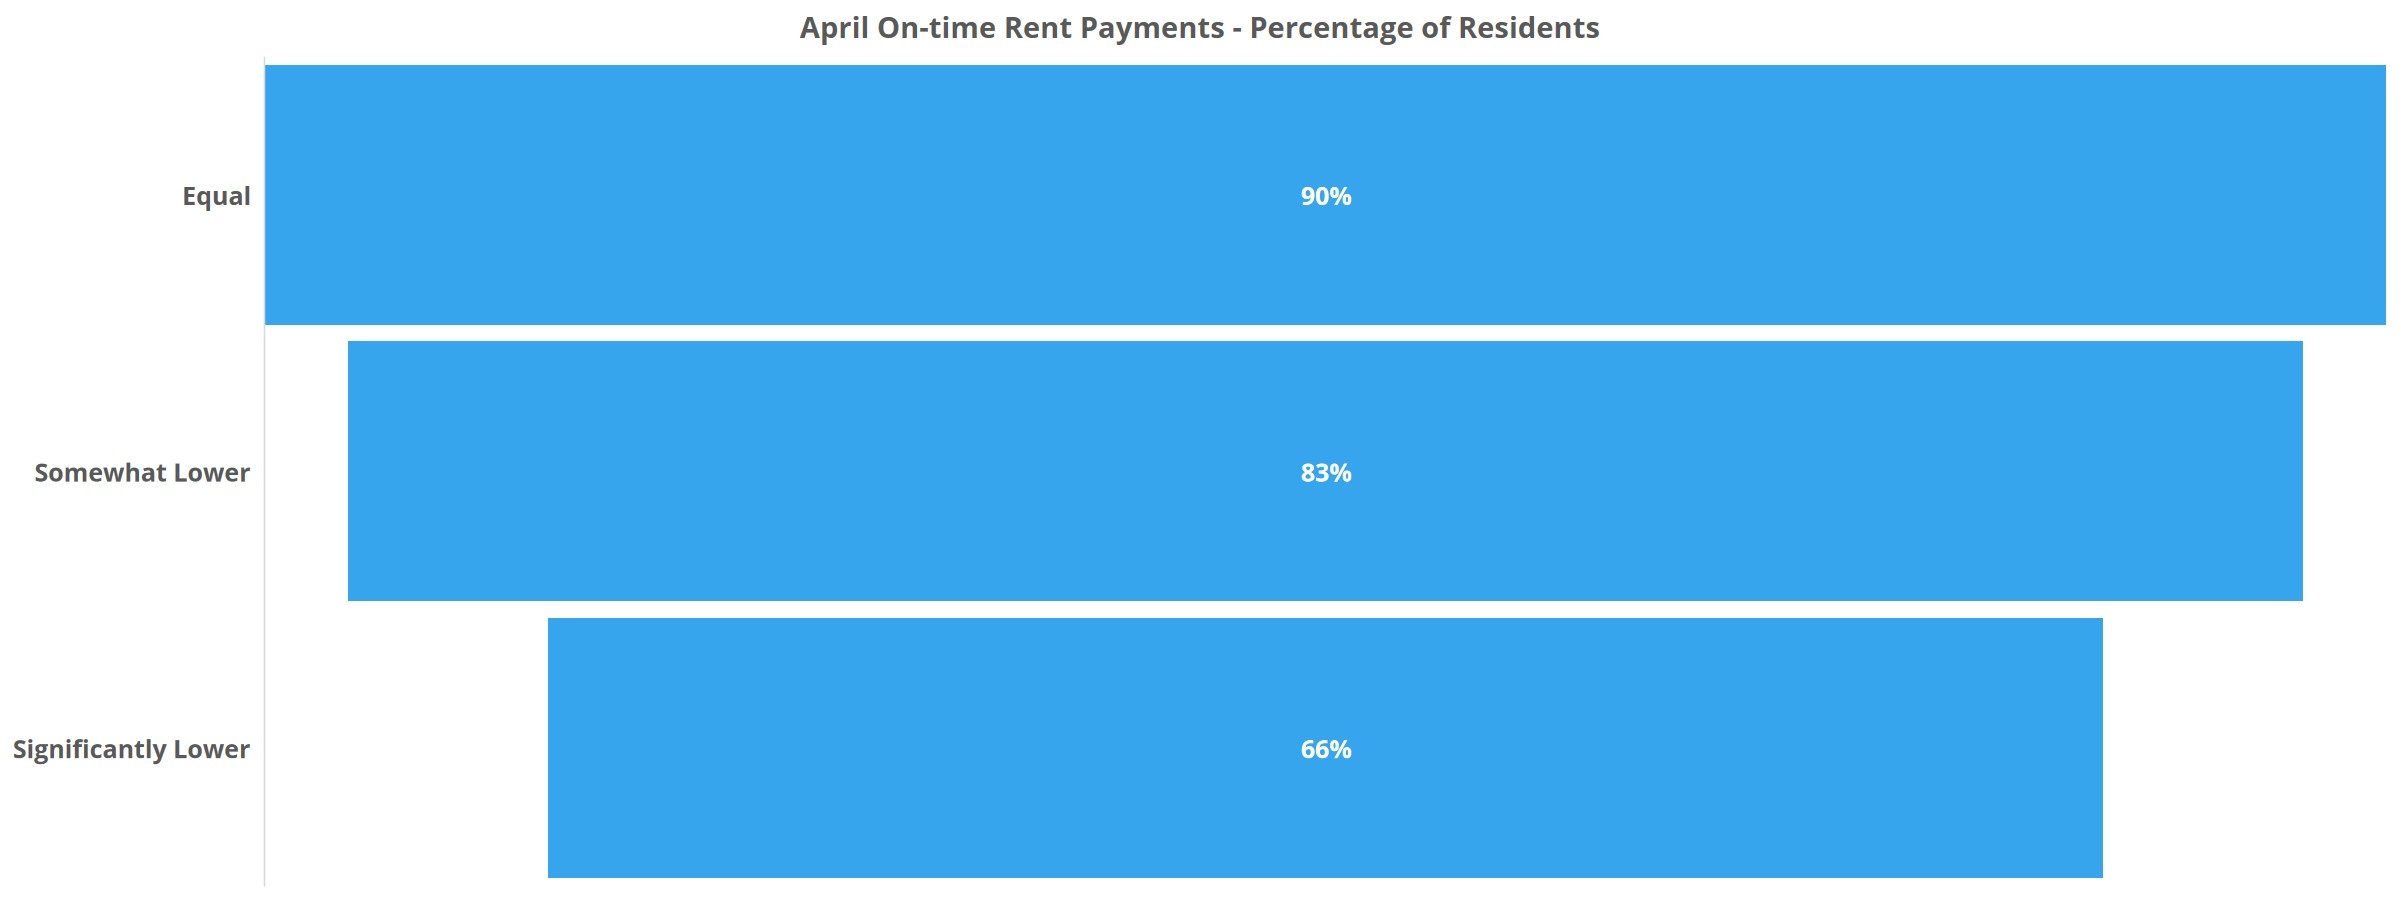 April On-time Rent Payments Percentage of Residents